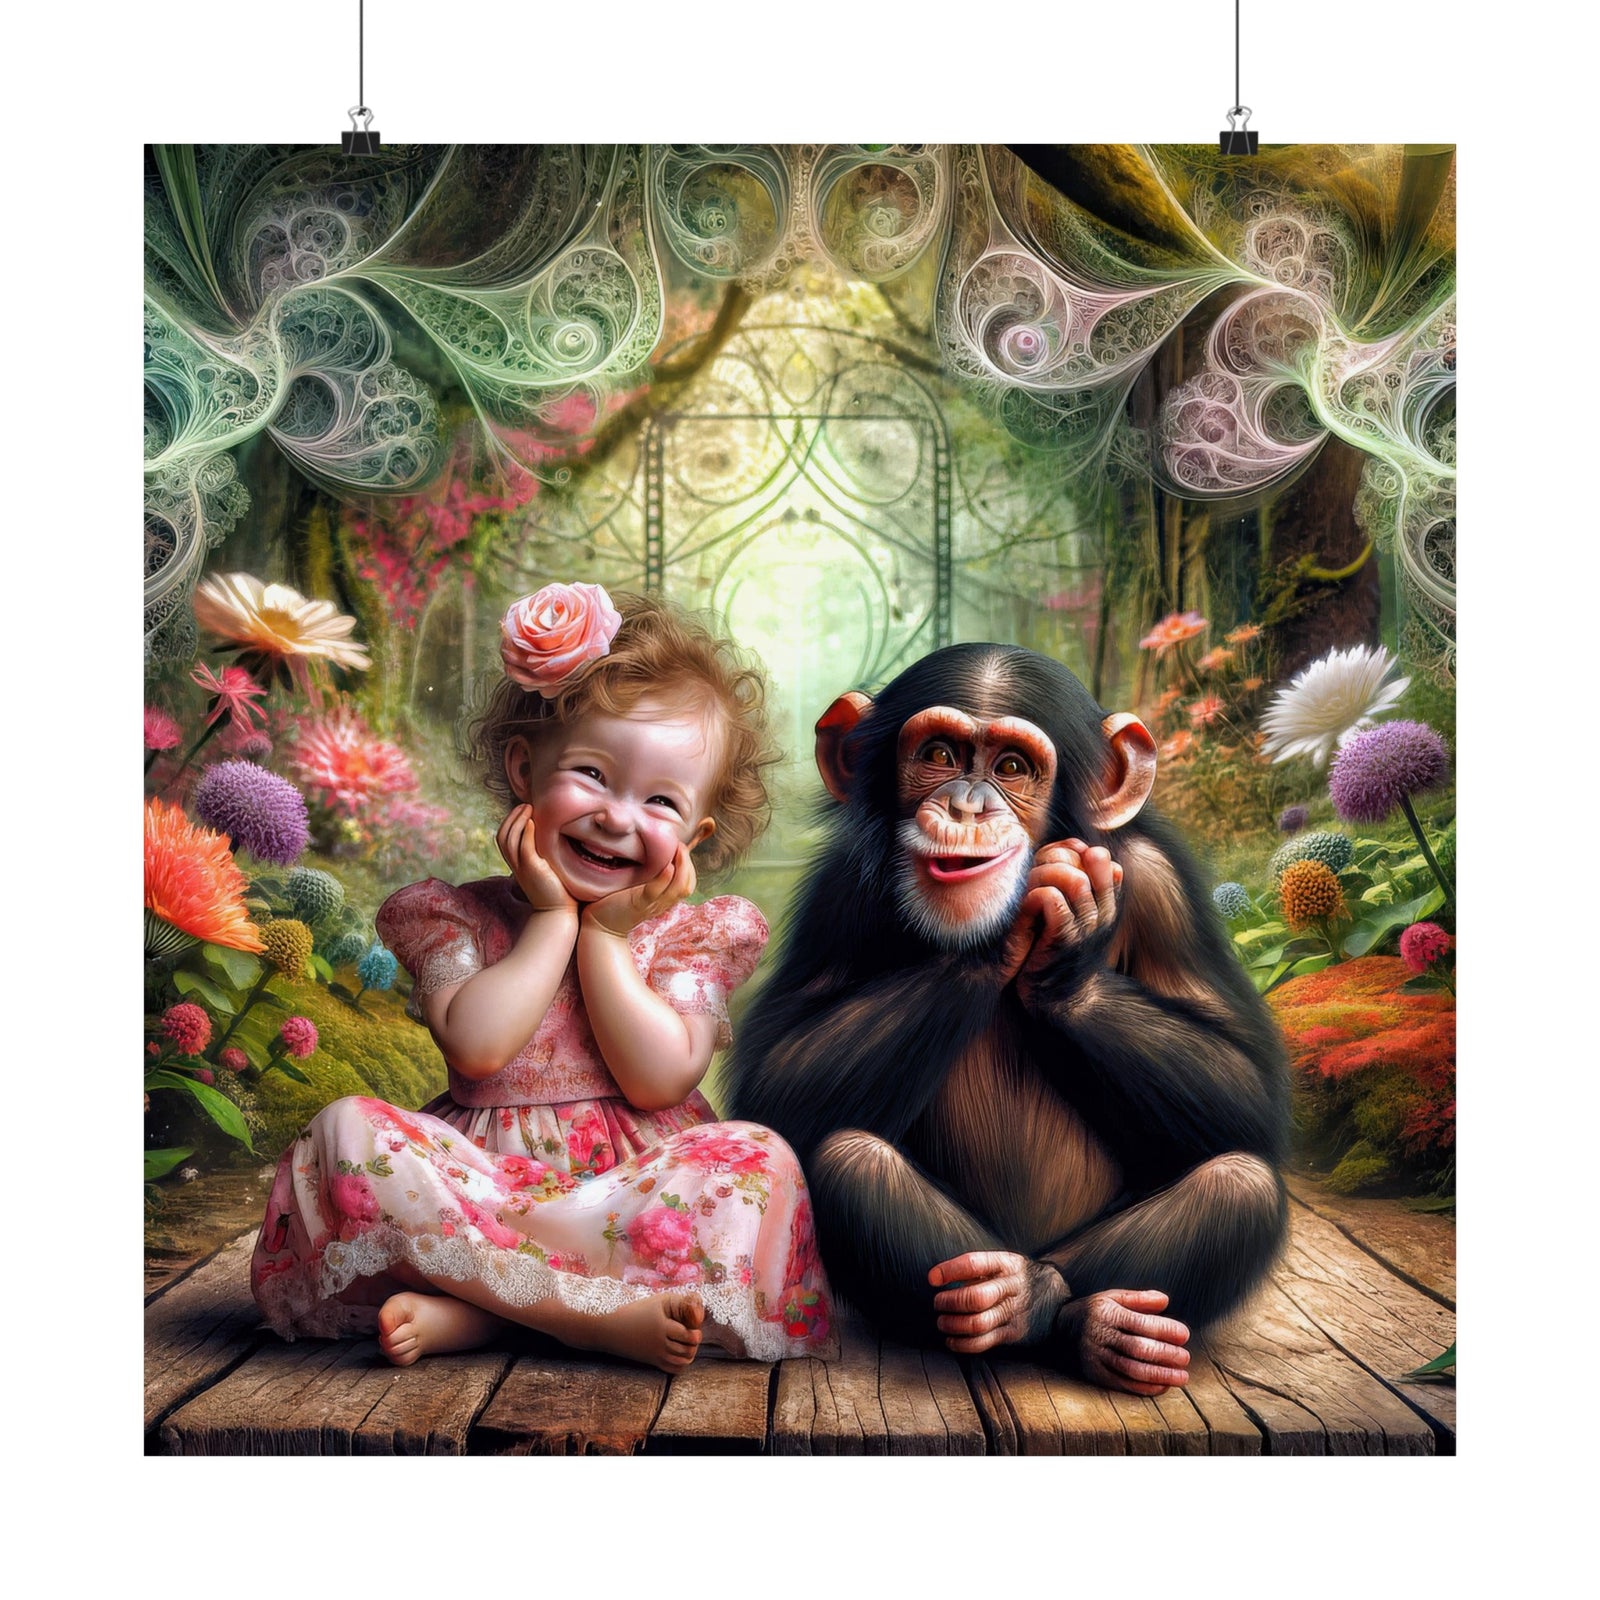 Giggles and Whimsy in Wonderland Poster